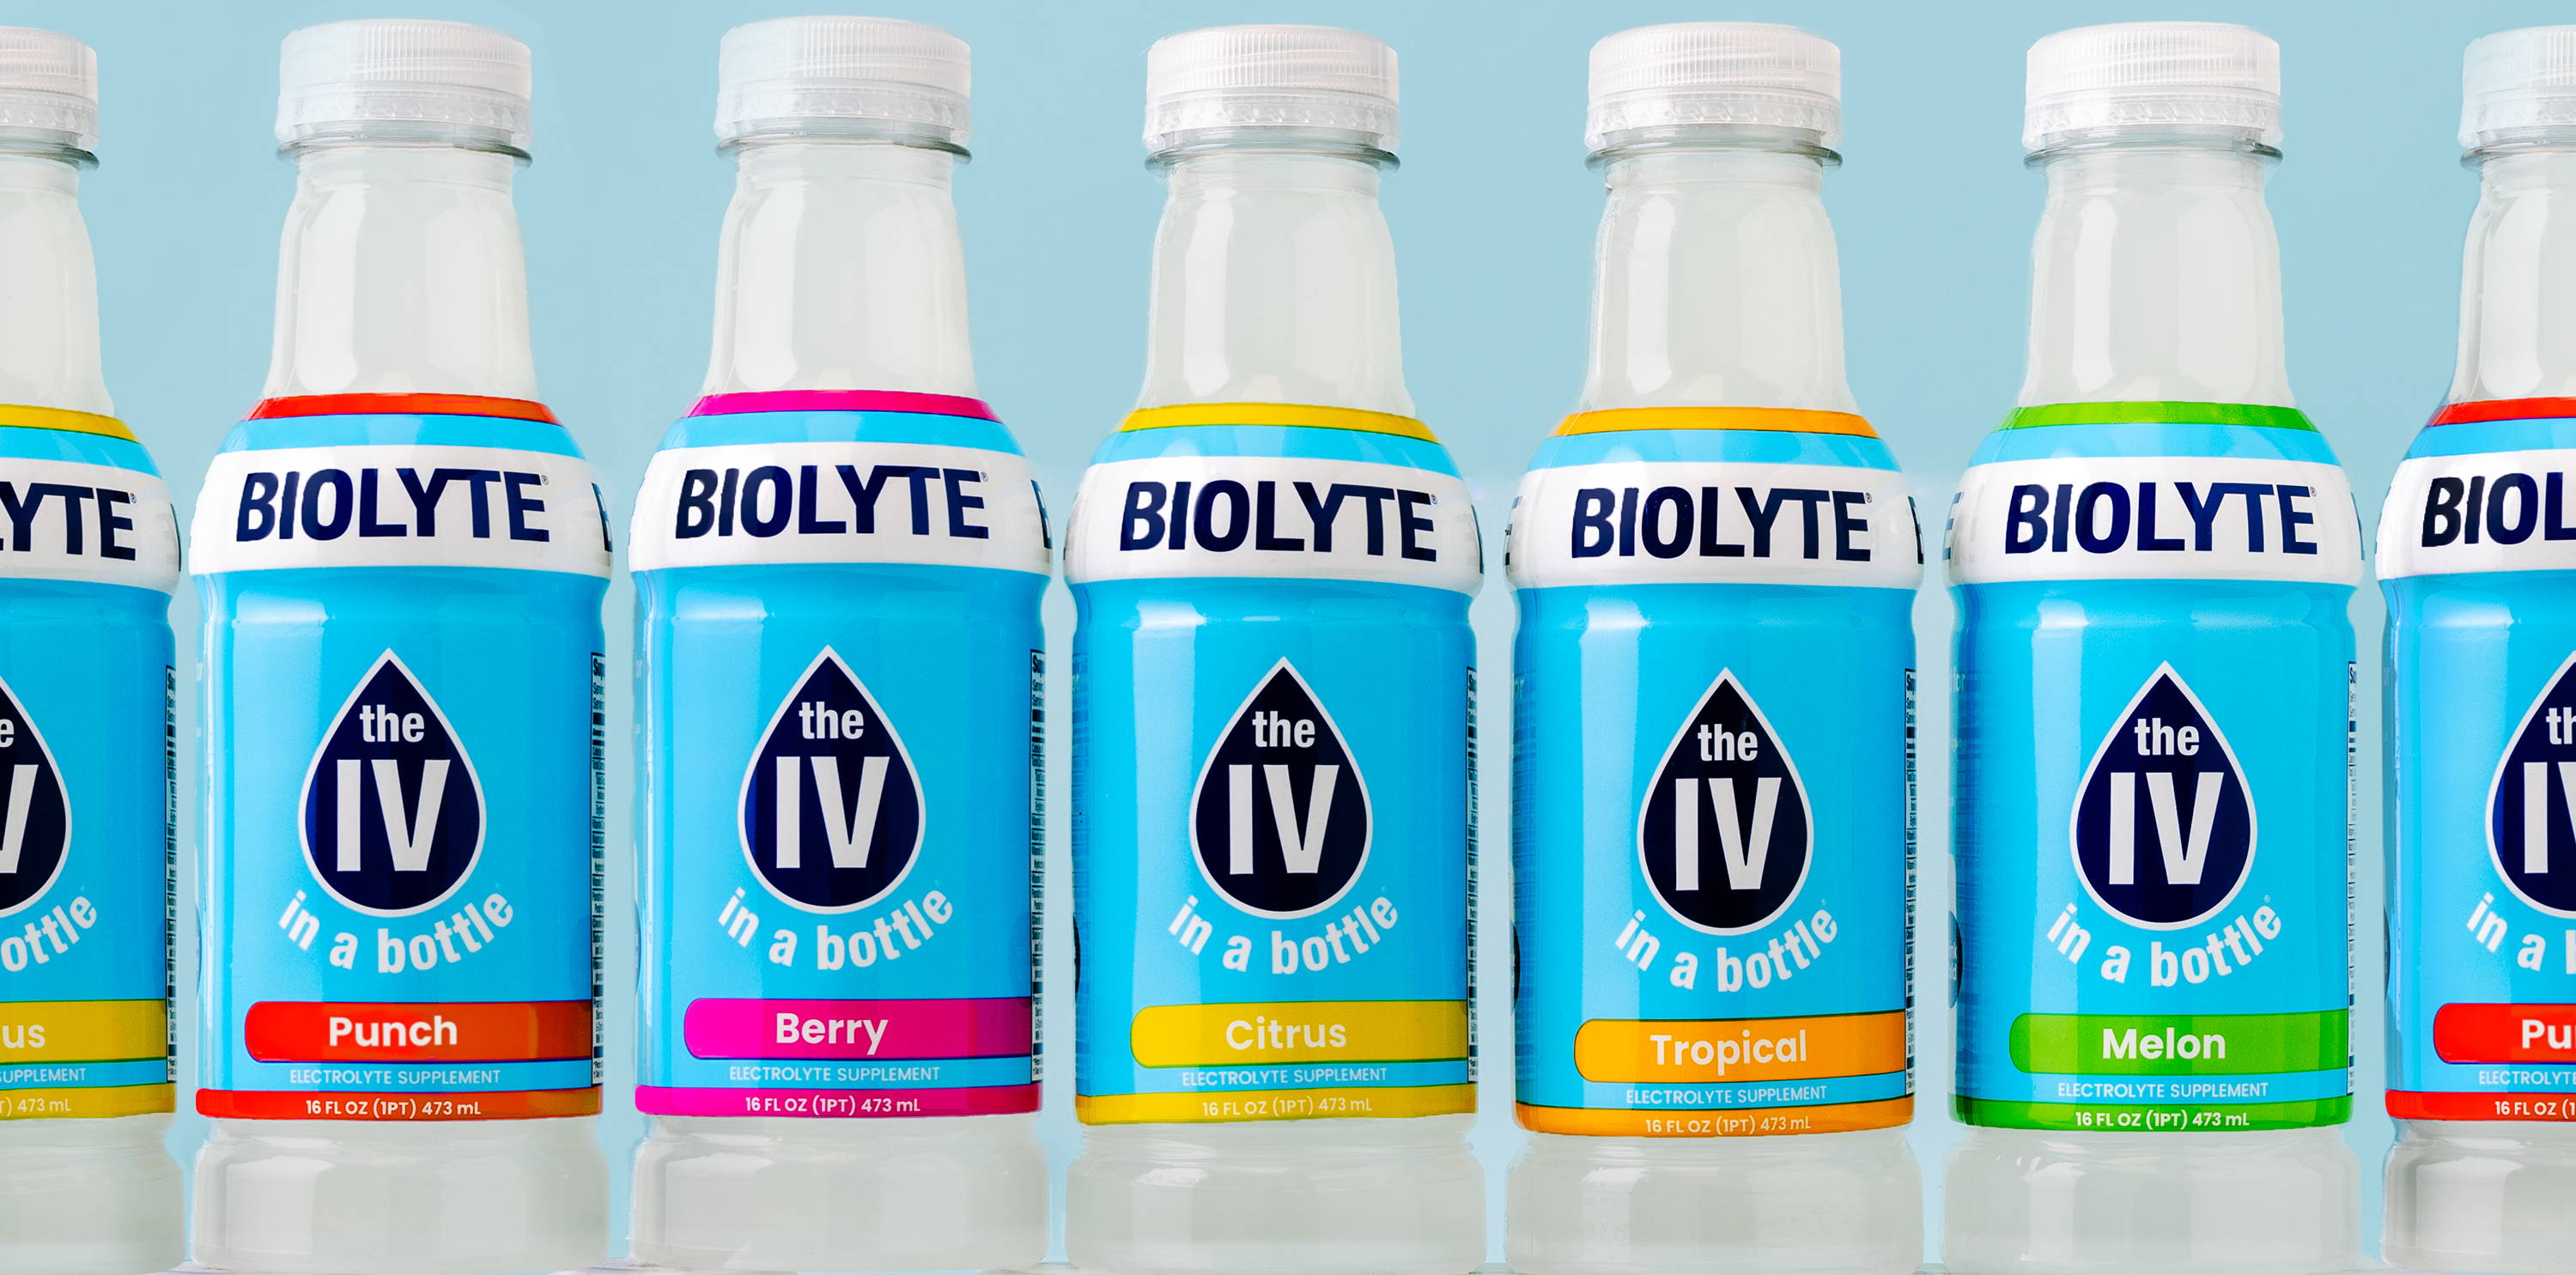 BIOLYTE, the IV in a bottle, comes in five physician formulated flavors.